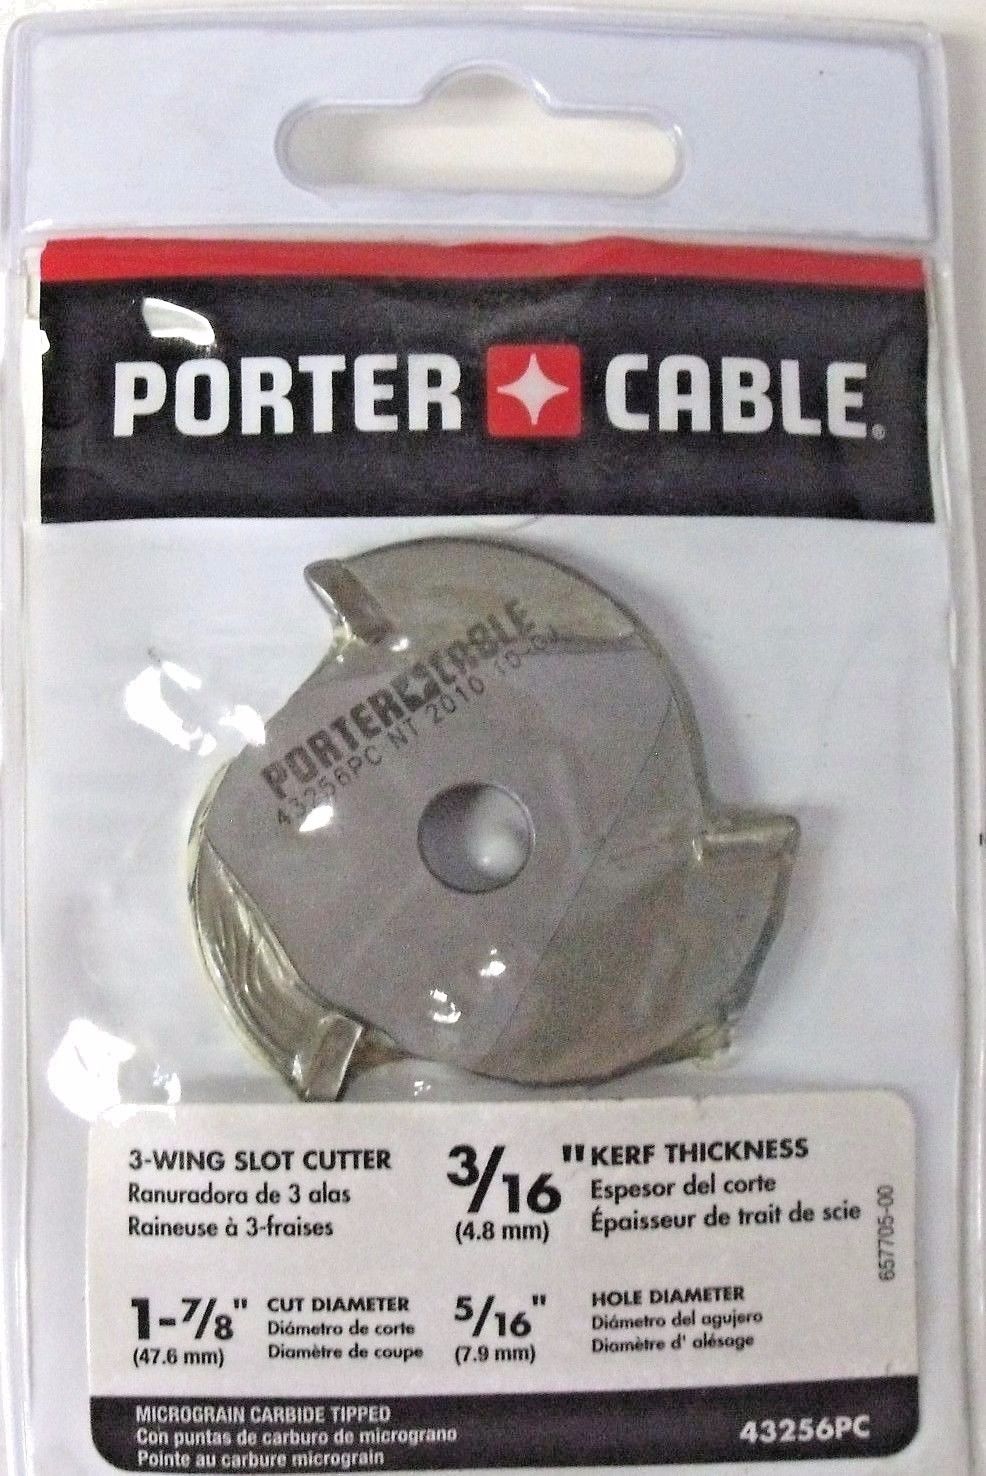 Porter Cable 43256PC 3/16" 3 Wing Slot Cutter  1/4" Shank